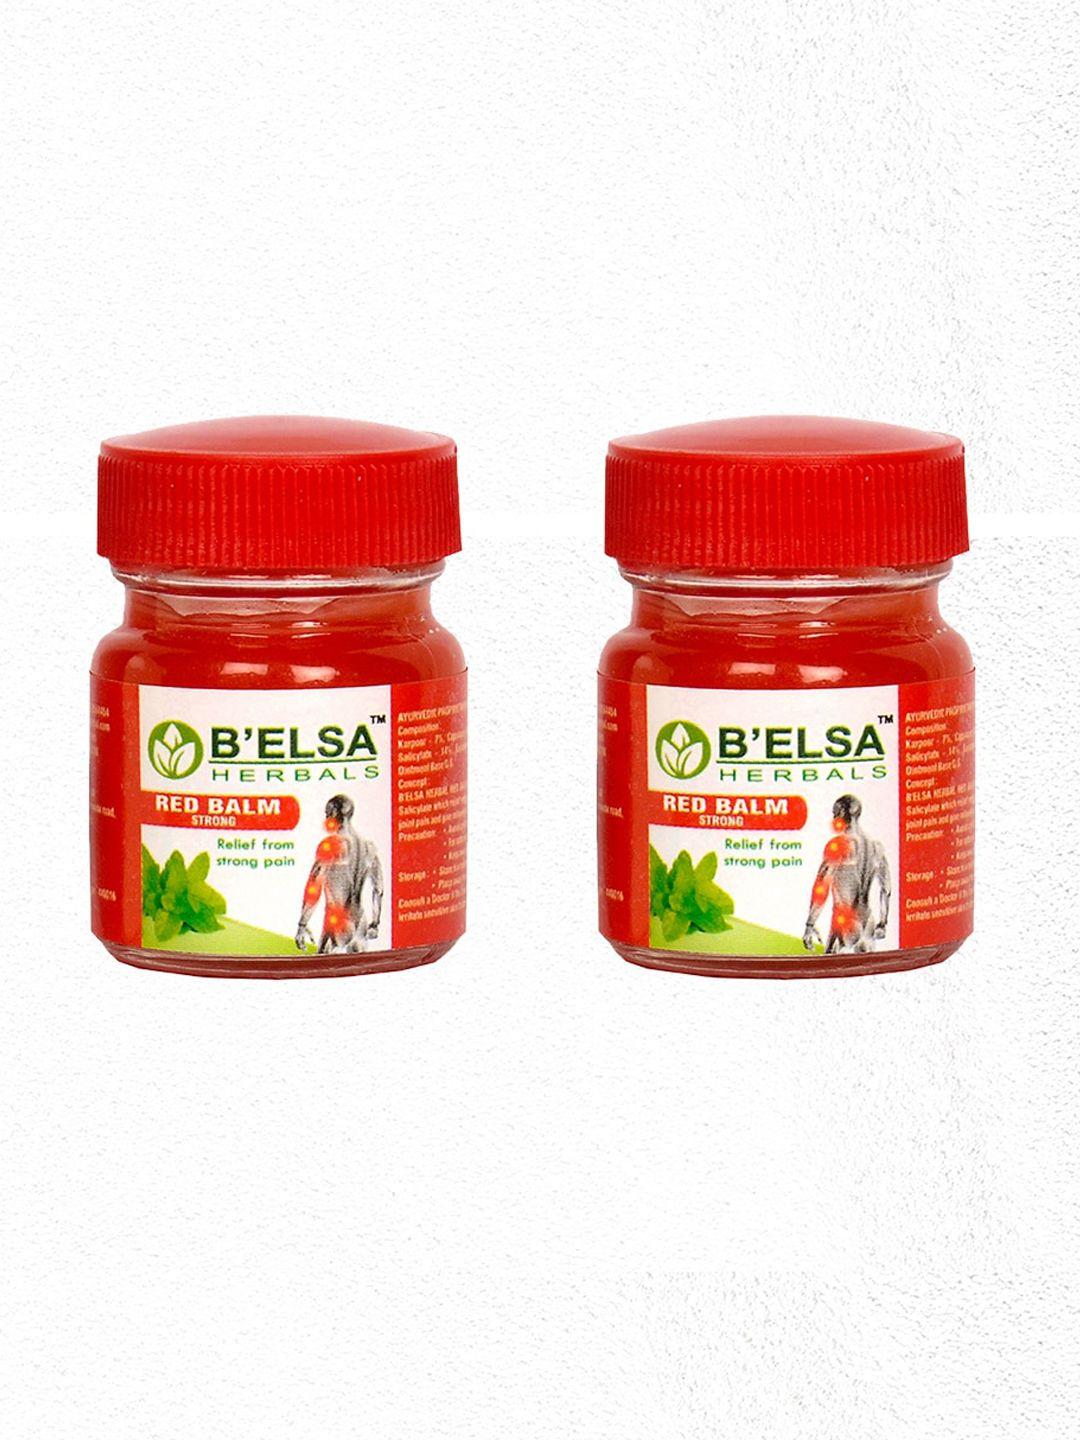 b'elsa herbal set of 2 red balm strong for relief from strong pain - 10 g each